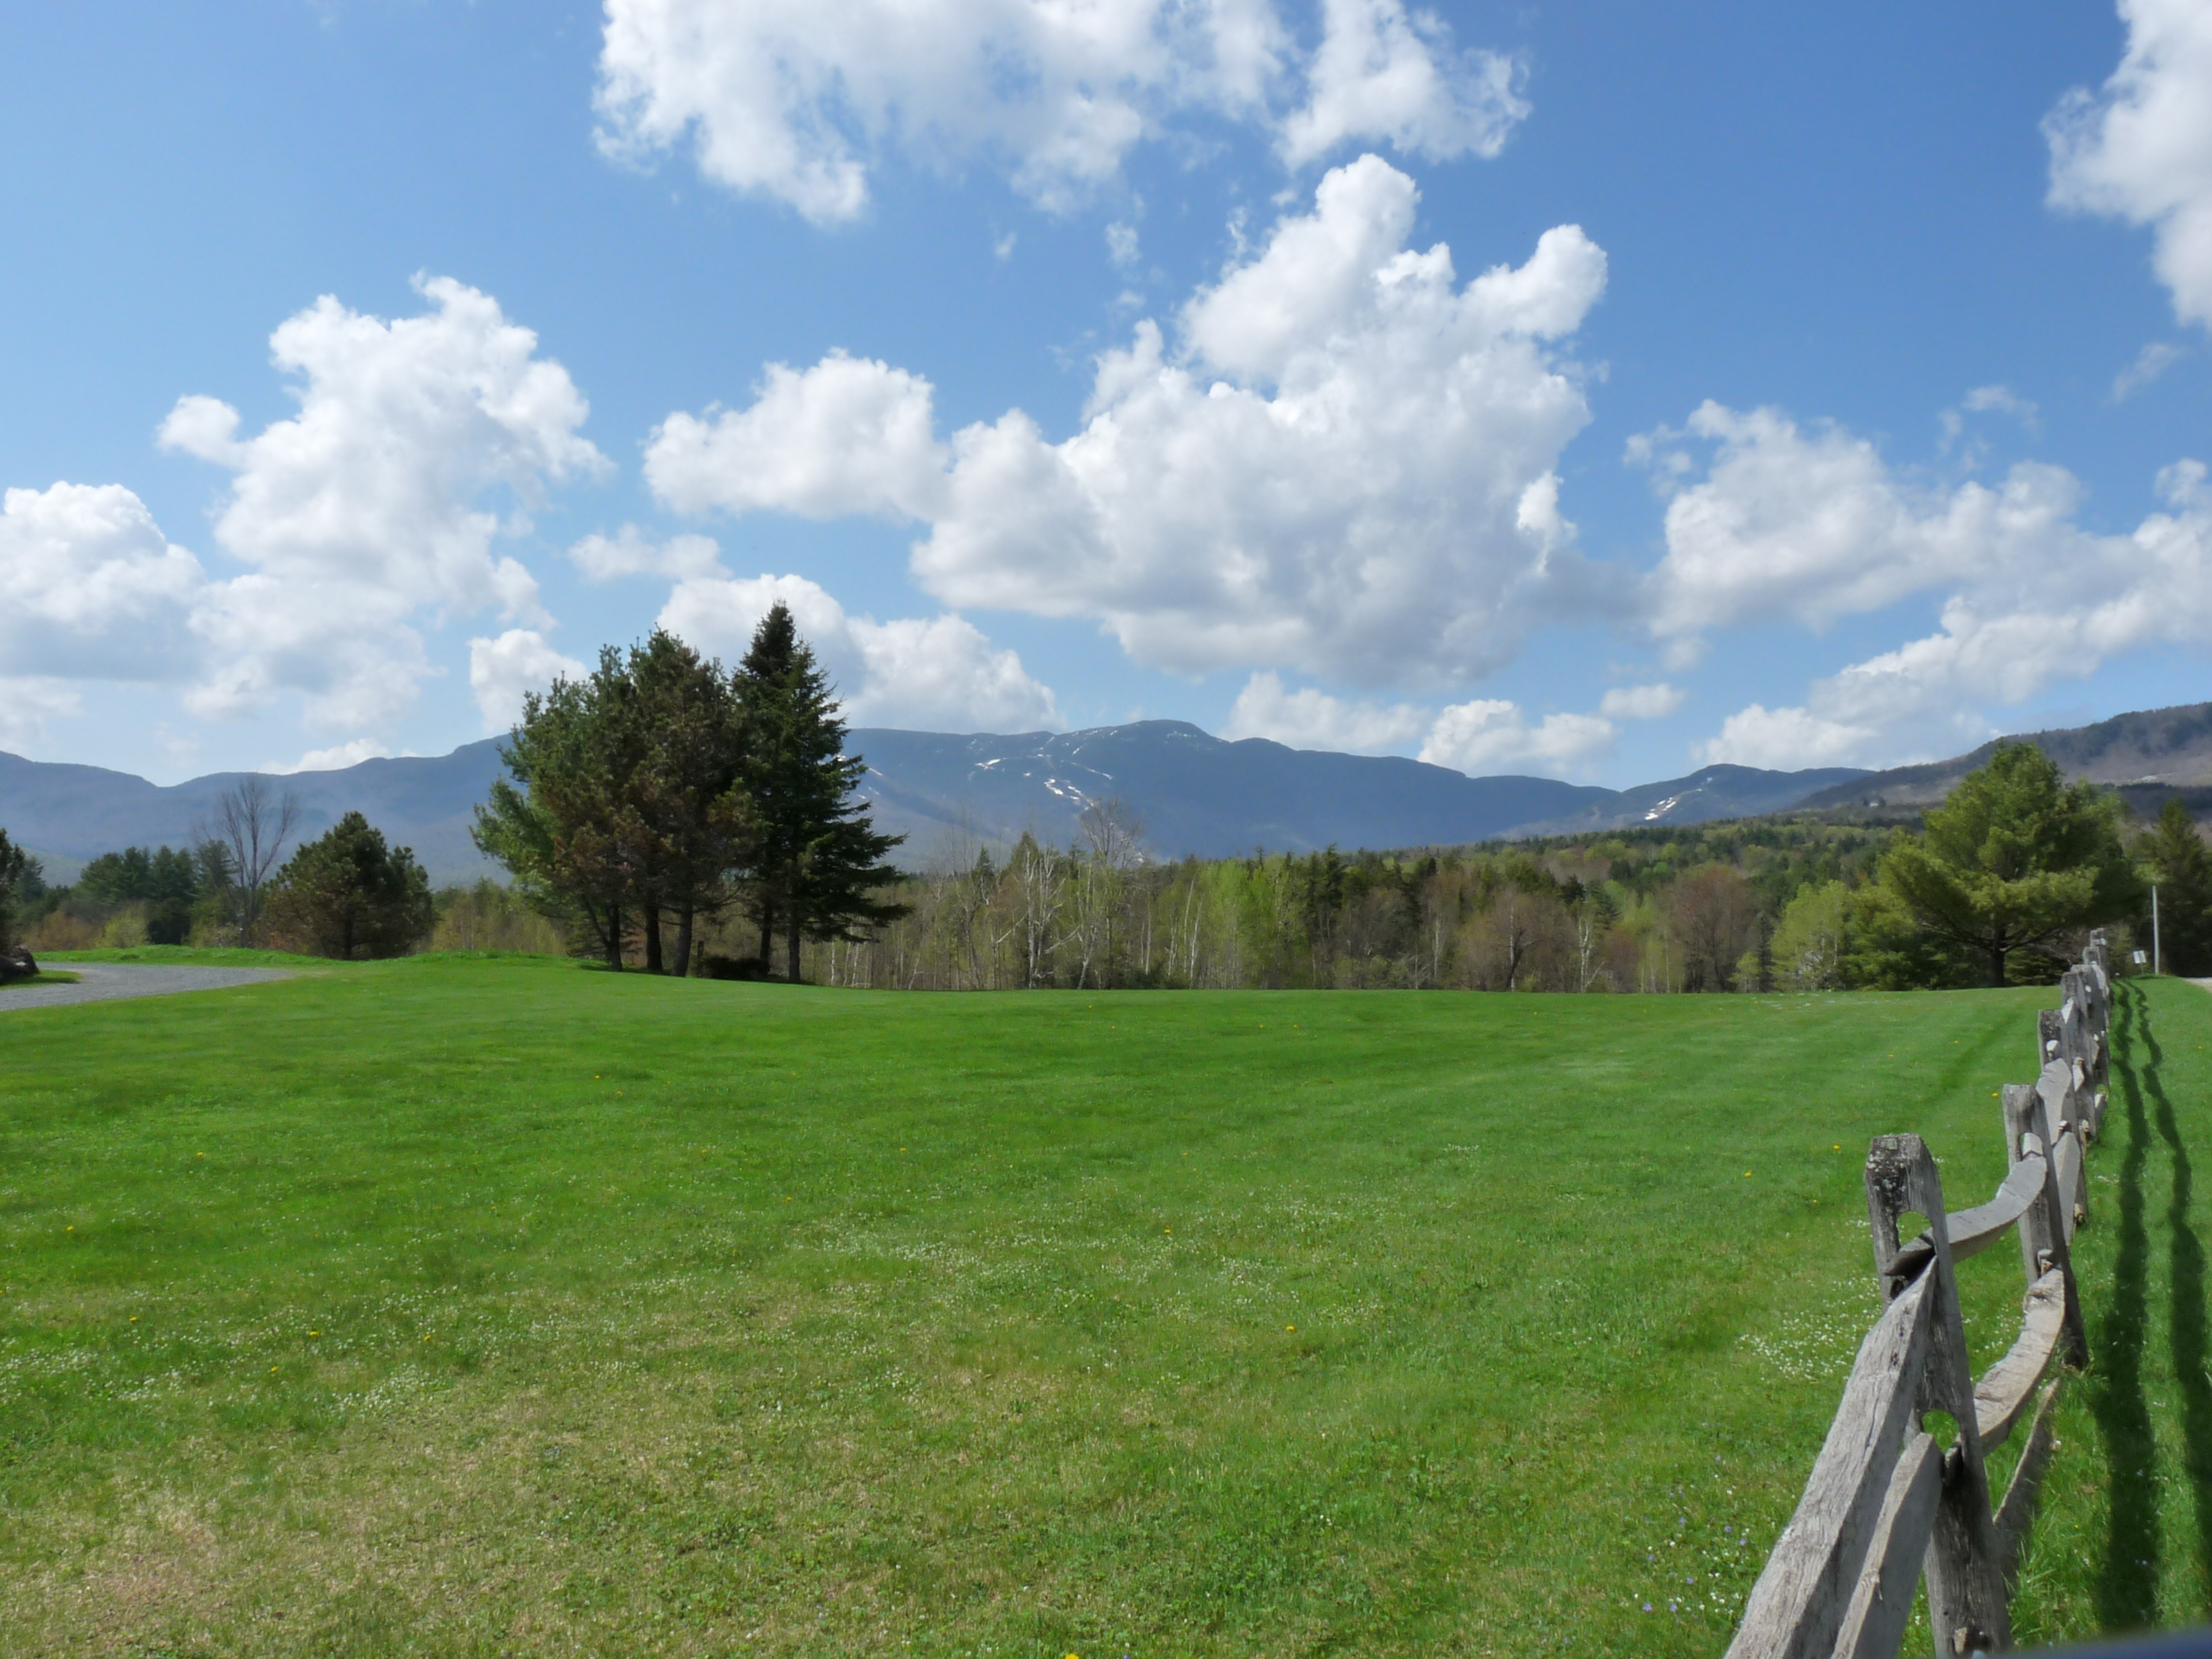 File:Vermont Countryside.jpg - Wikimedia Commons